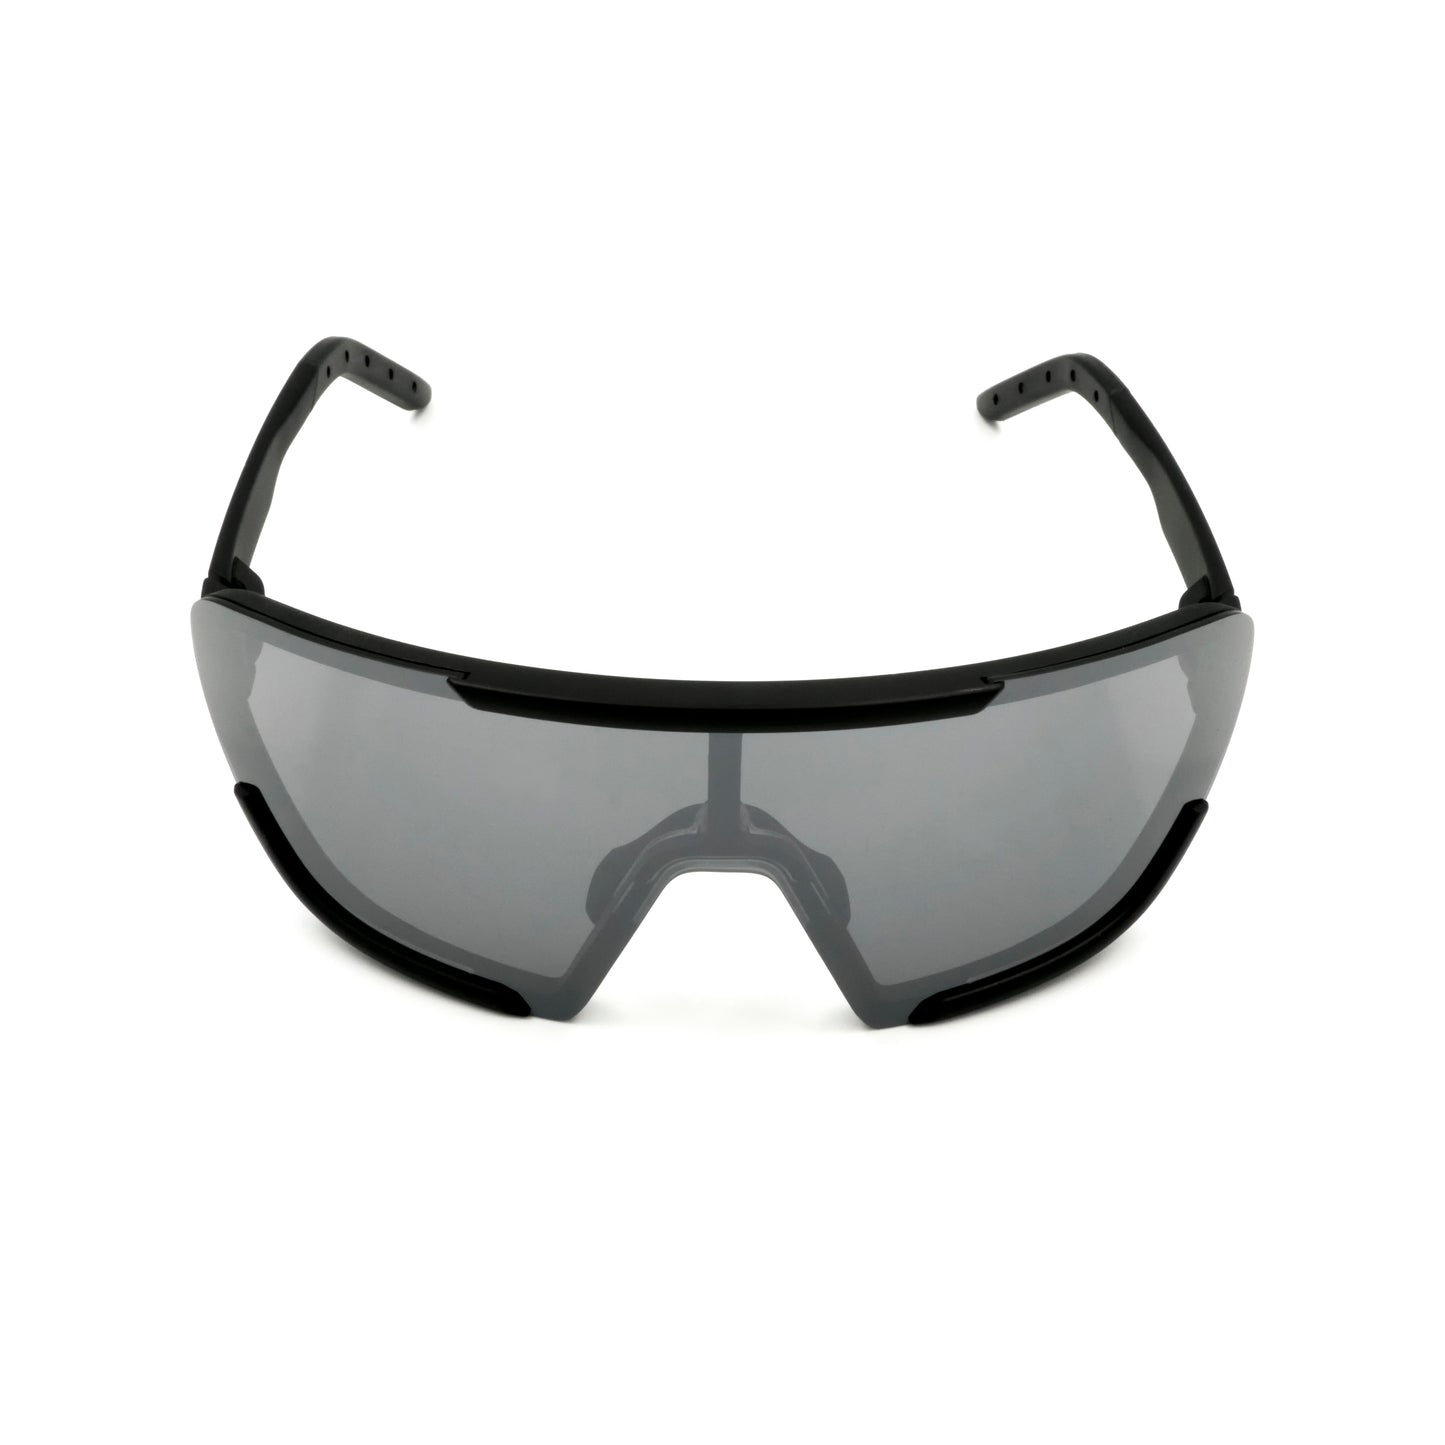 Cleanskin Atmos Sunglasses - One Size Fits Most - Matte Black - Grey - Smoke Lens